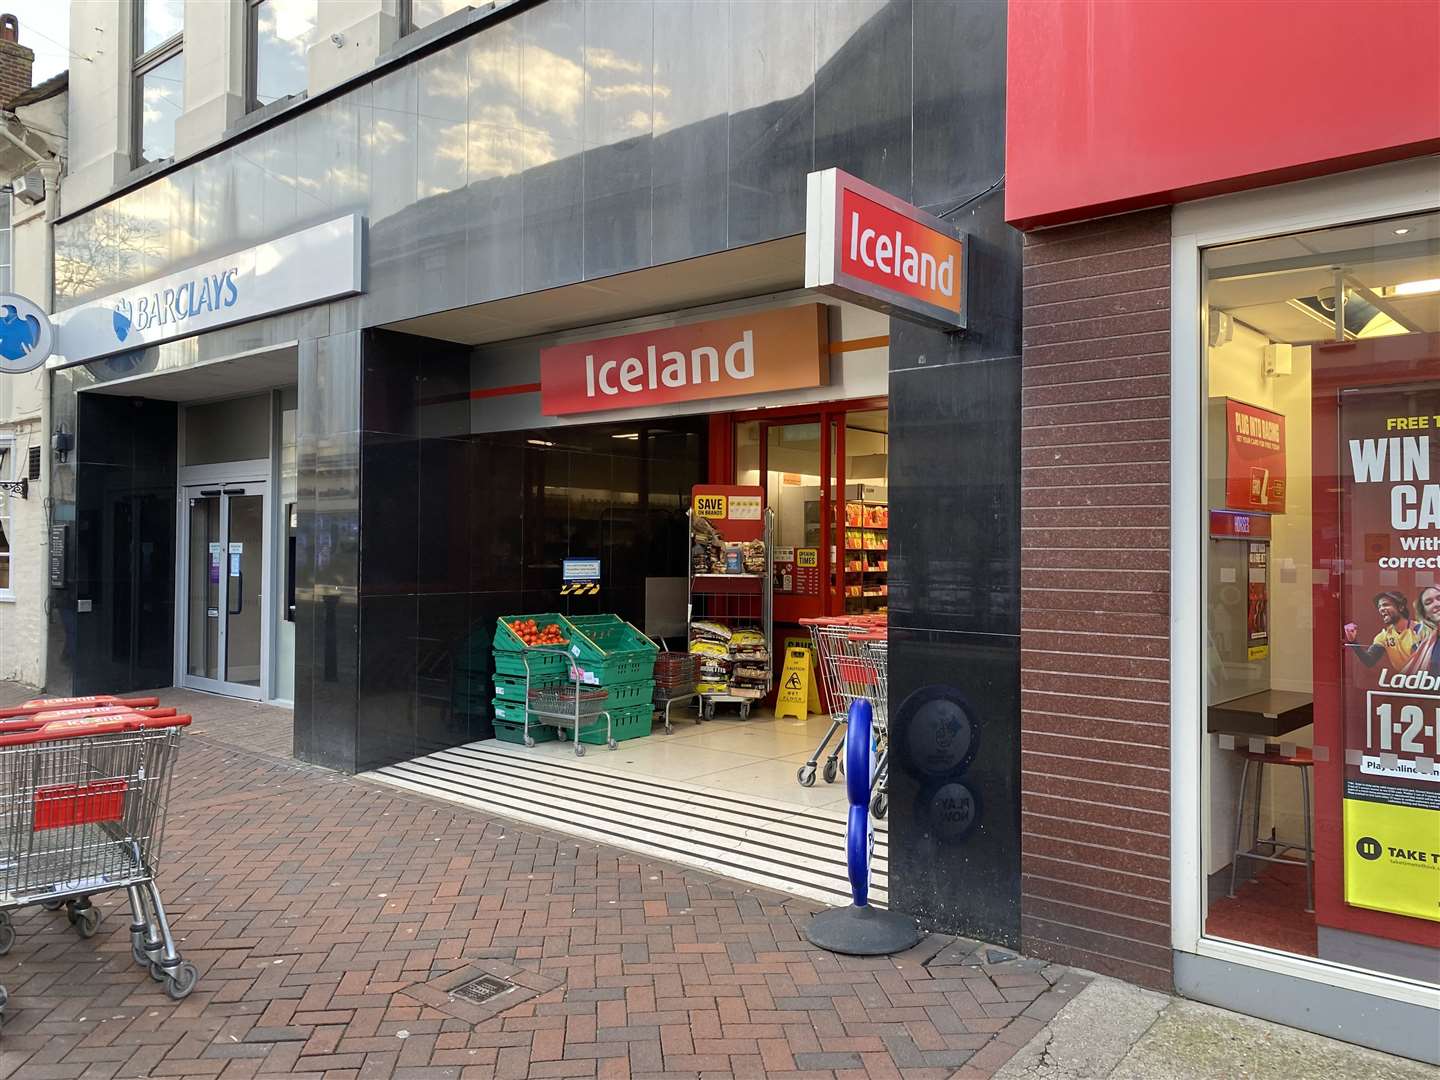 Lupascu Pisica went into the Iceland store in Ashford in a drunken state